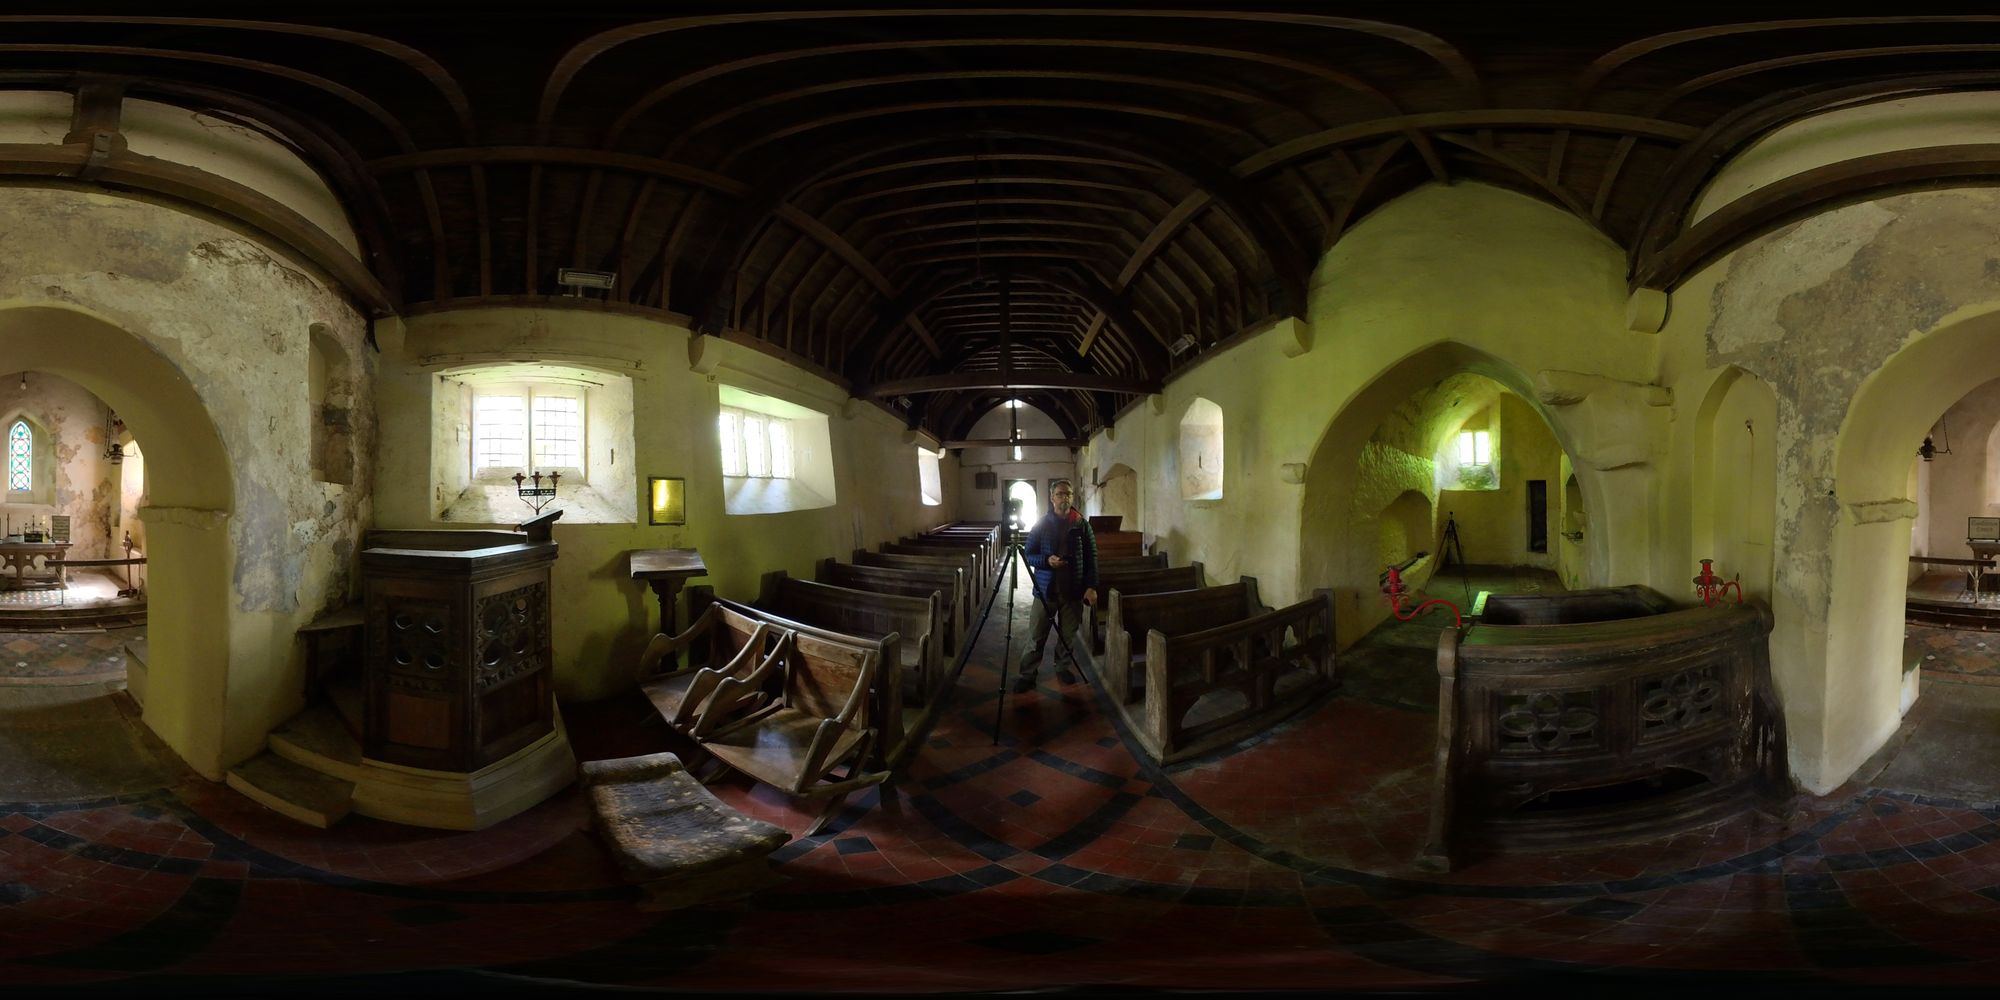 Member Powered Photography: Gumfreston in VR